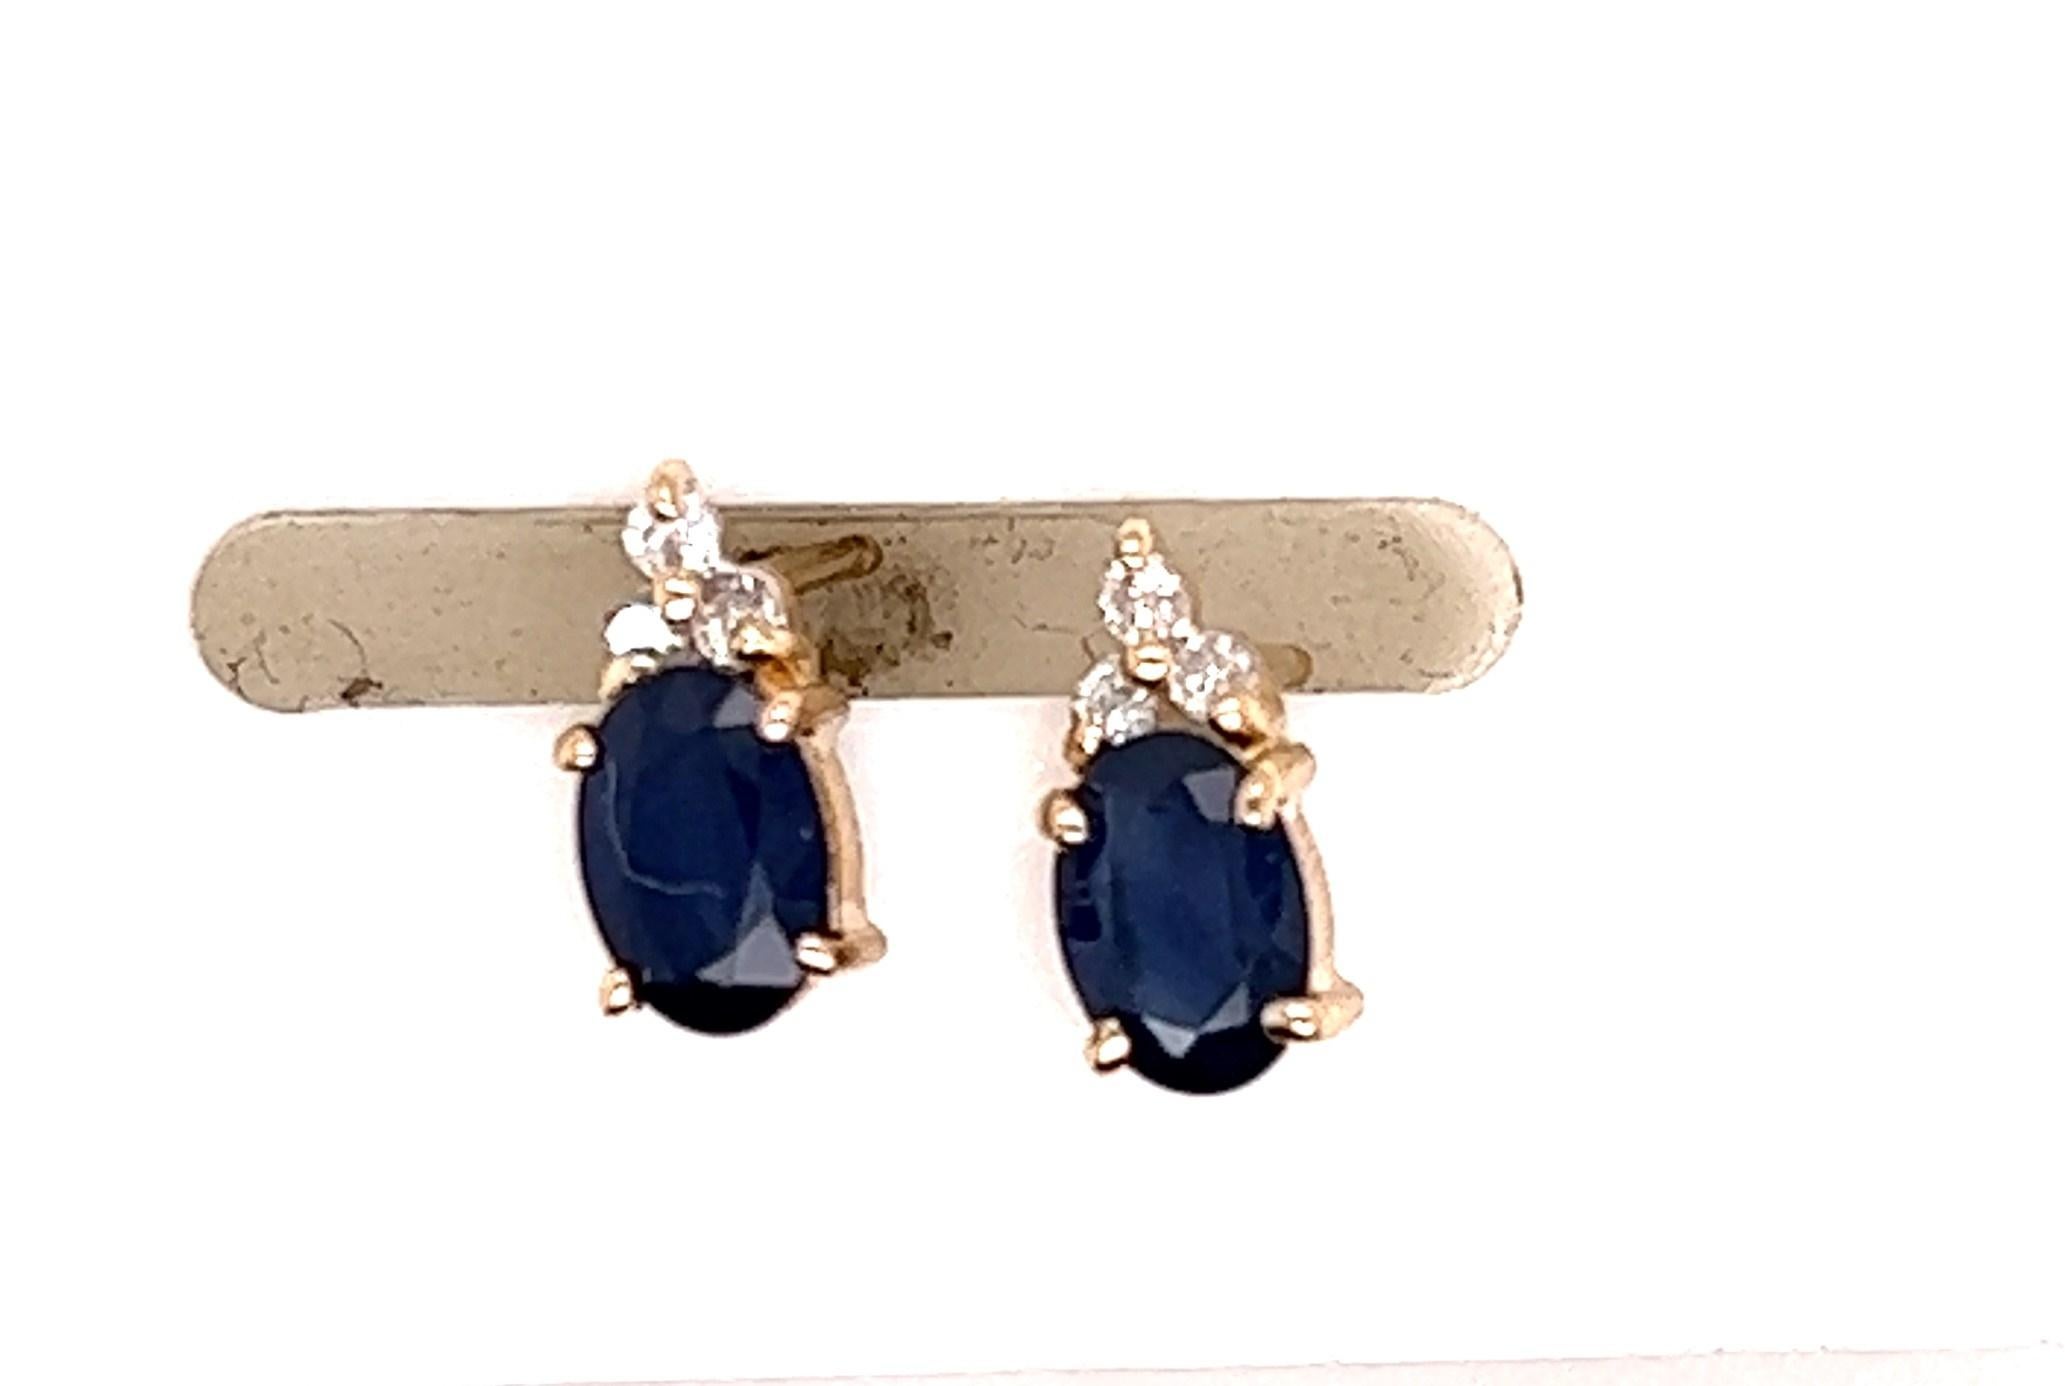 14kt yellow gold stud earrings with oval sapphires weighing approximately 1.10 carats and three diamonds at the top of each sapphire weighing approximately .18 carats. The diamonds are H-I color and SI1-I1 Clarity. 

the earrings measure 5/16 inches